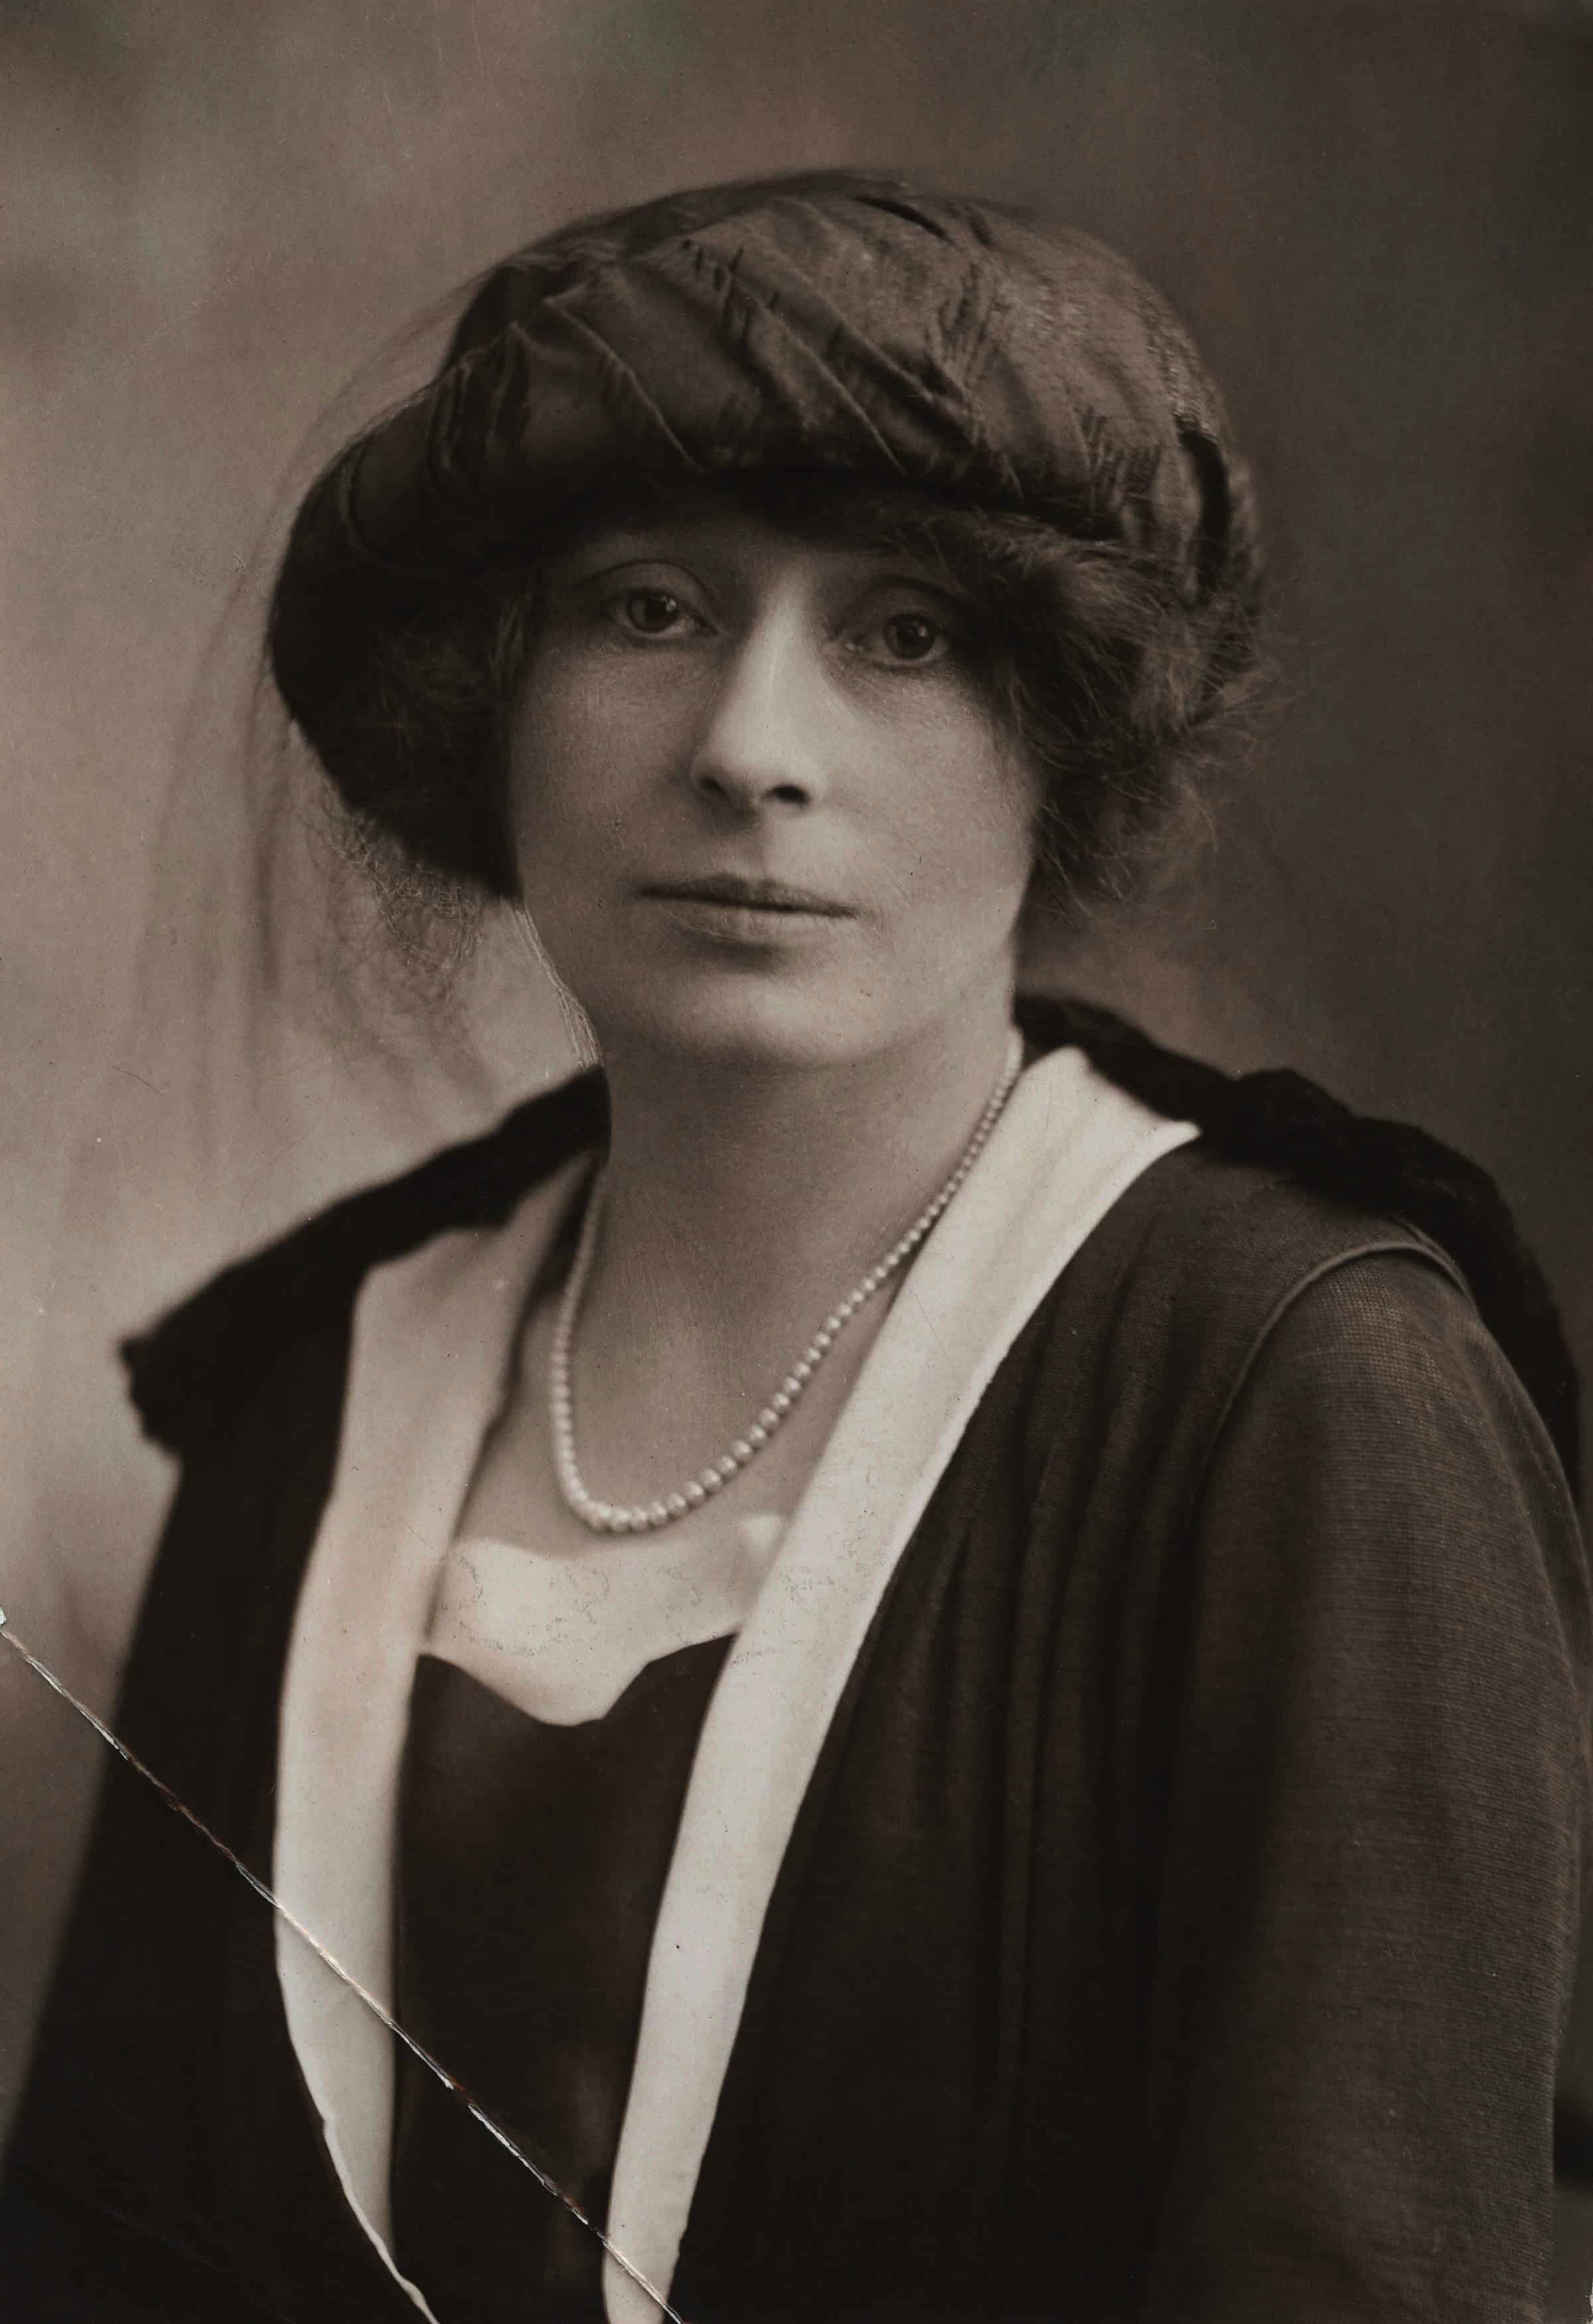 Rachel Parsons, first president of the Women's Engineering Society